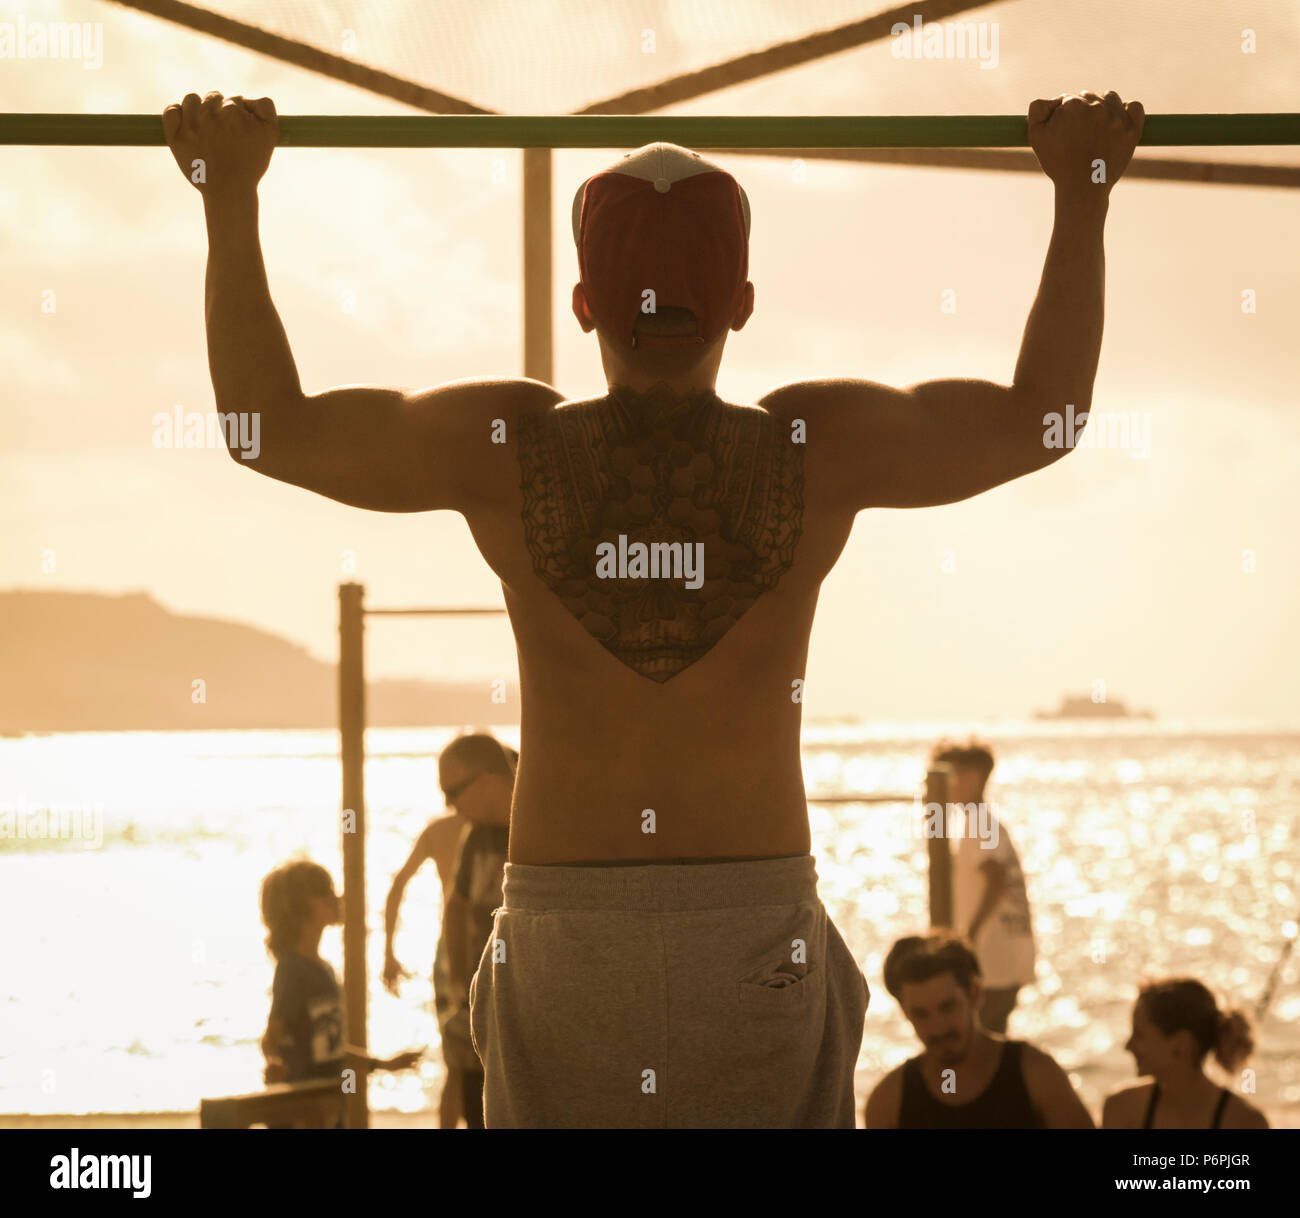 Rear view of muscular man with back tattoo doing pull ups/chin ups on beach in Spain Stock Photo